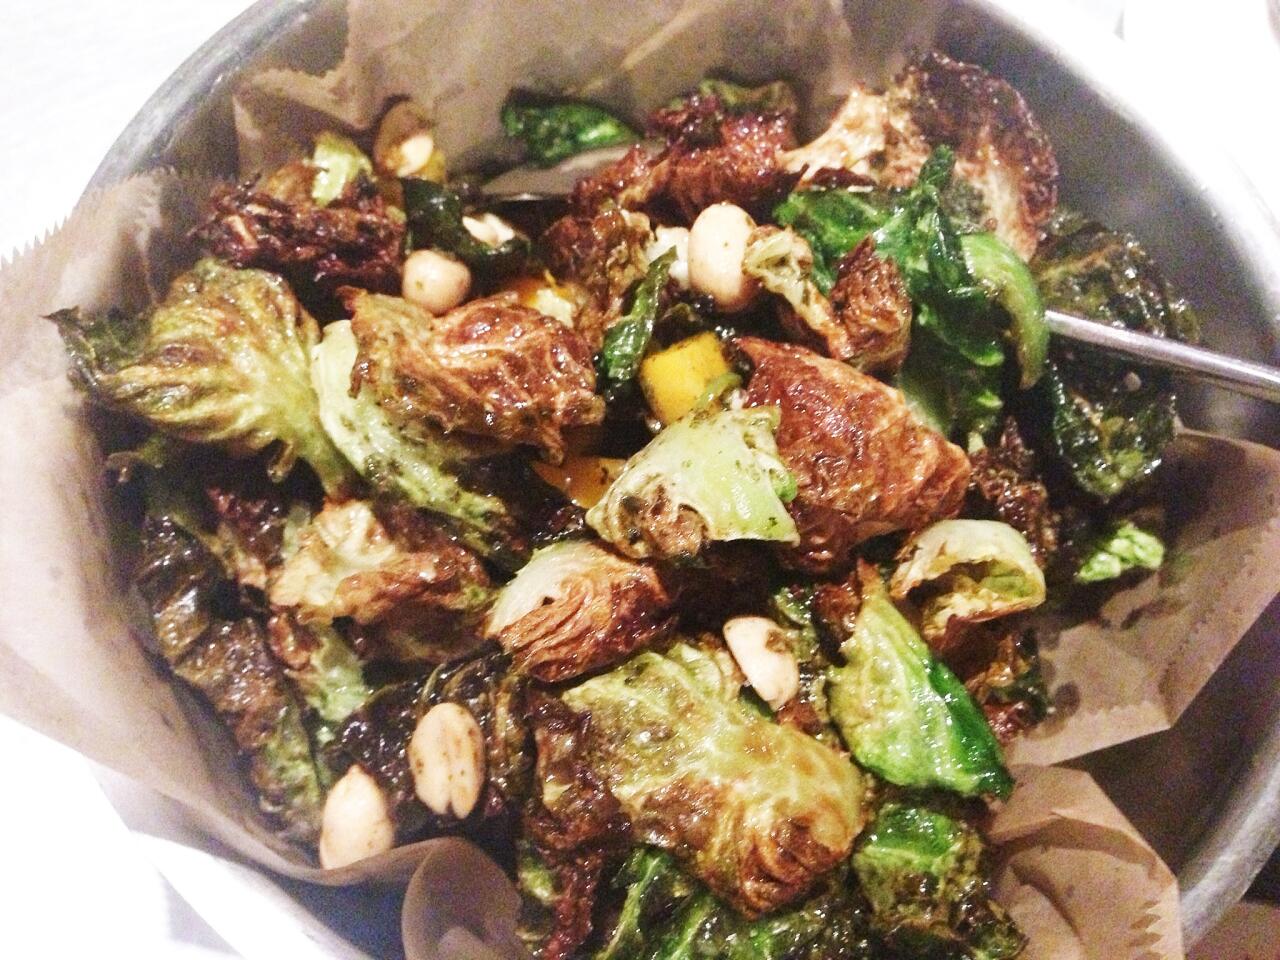 The Thai Brussels sprouts with mango, chilies and nuts.